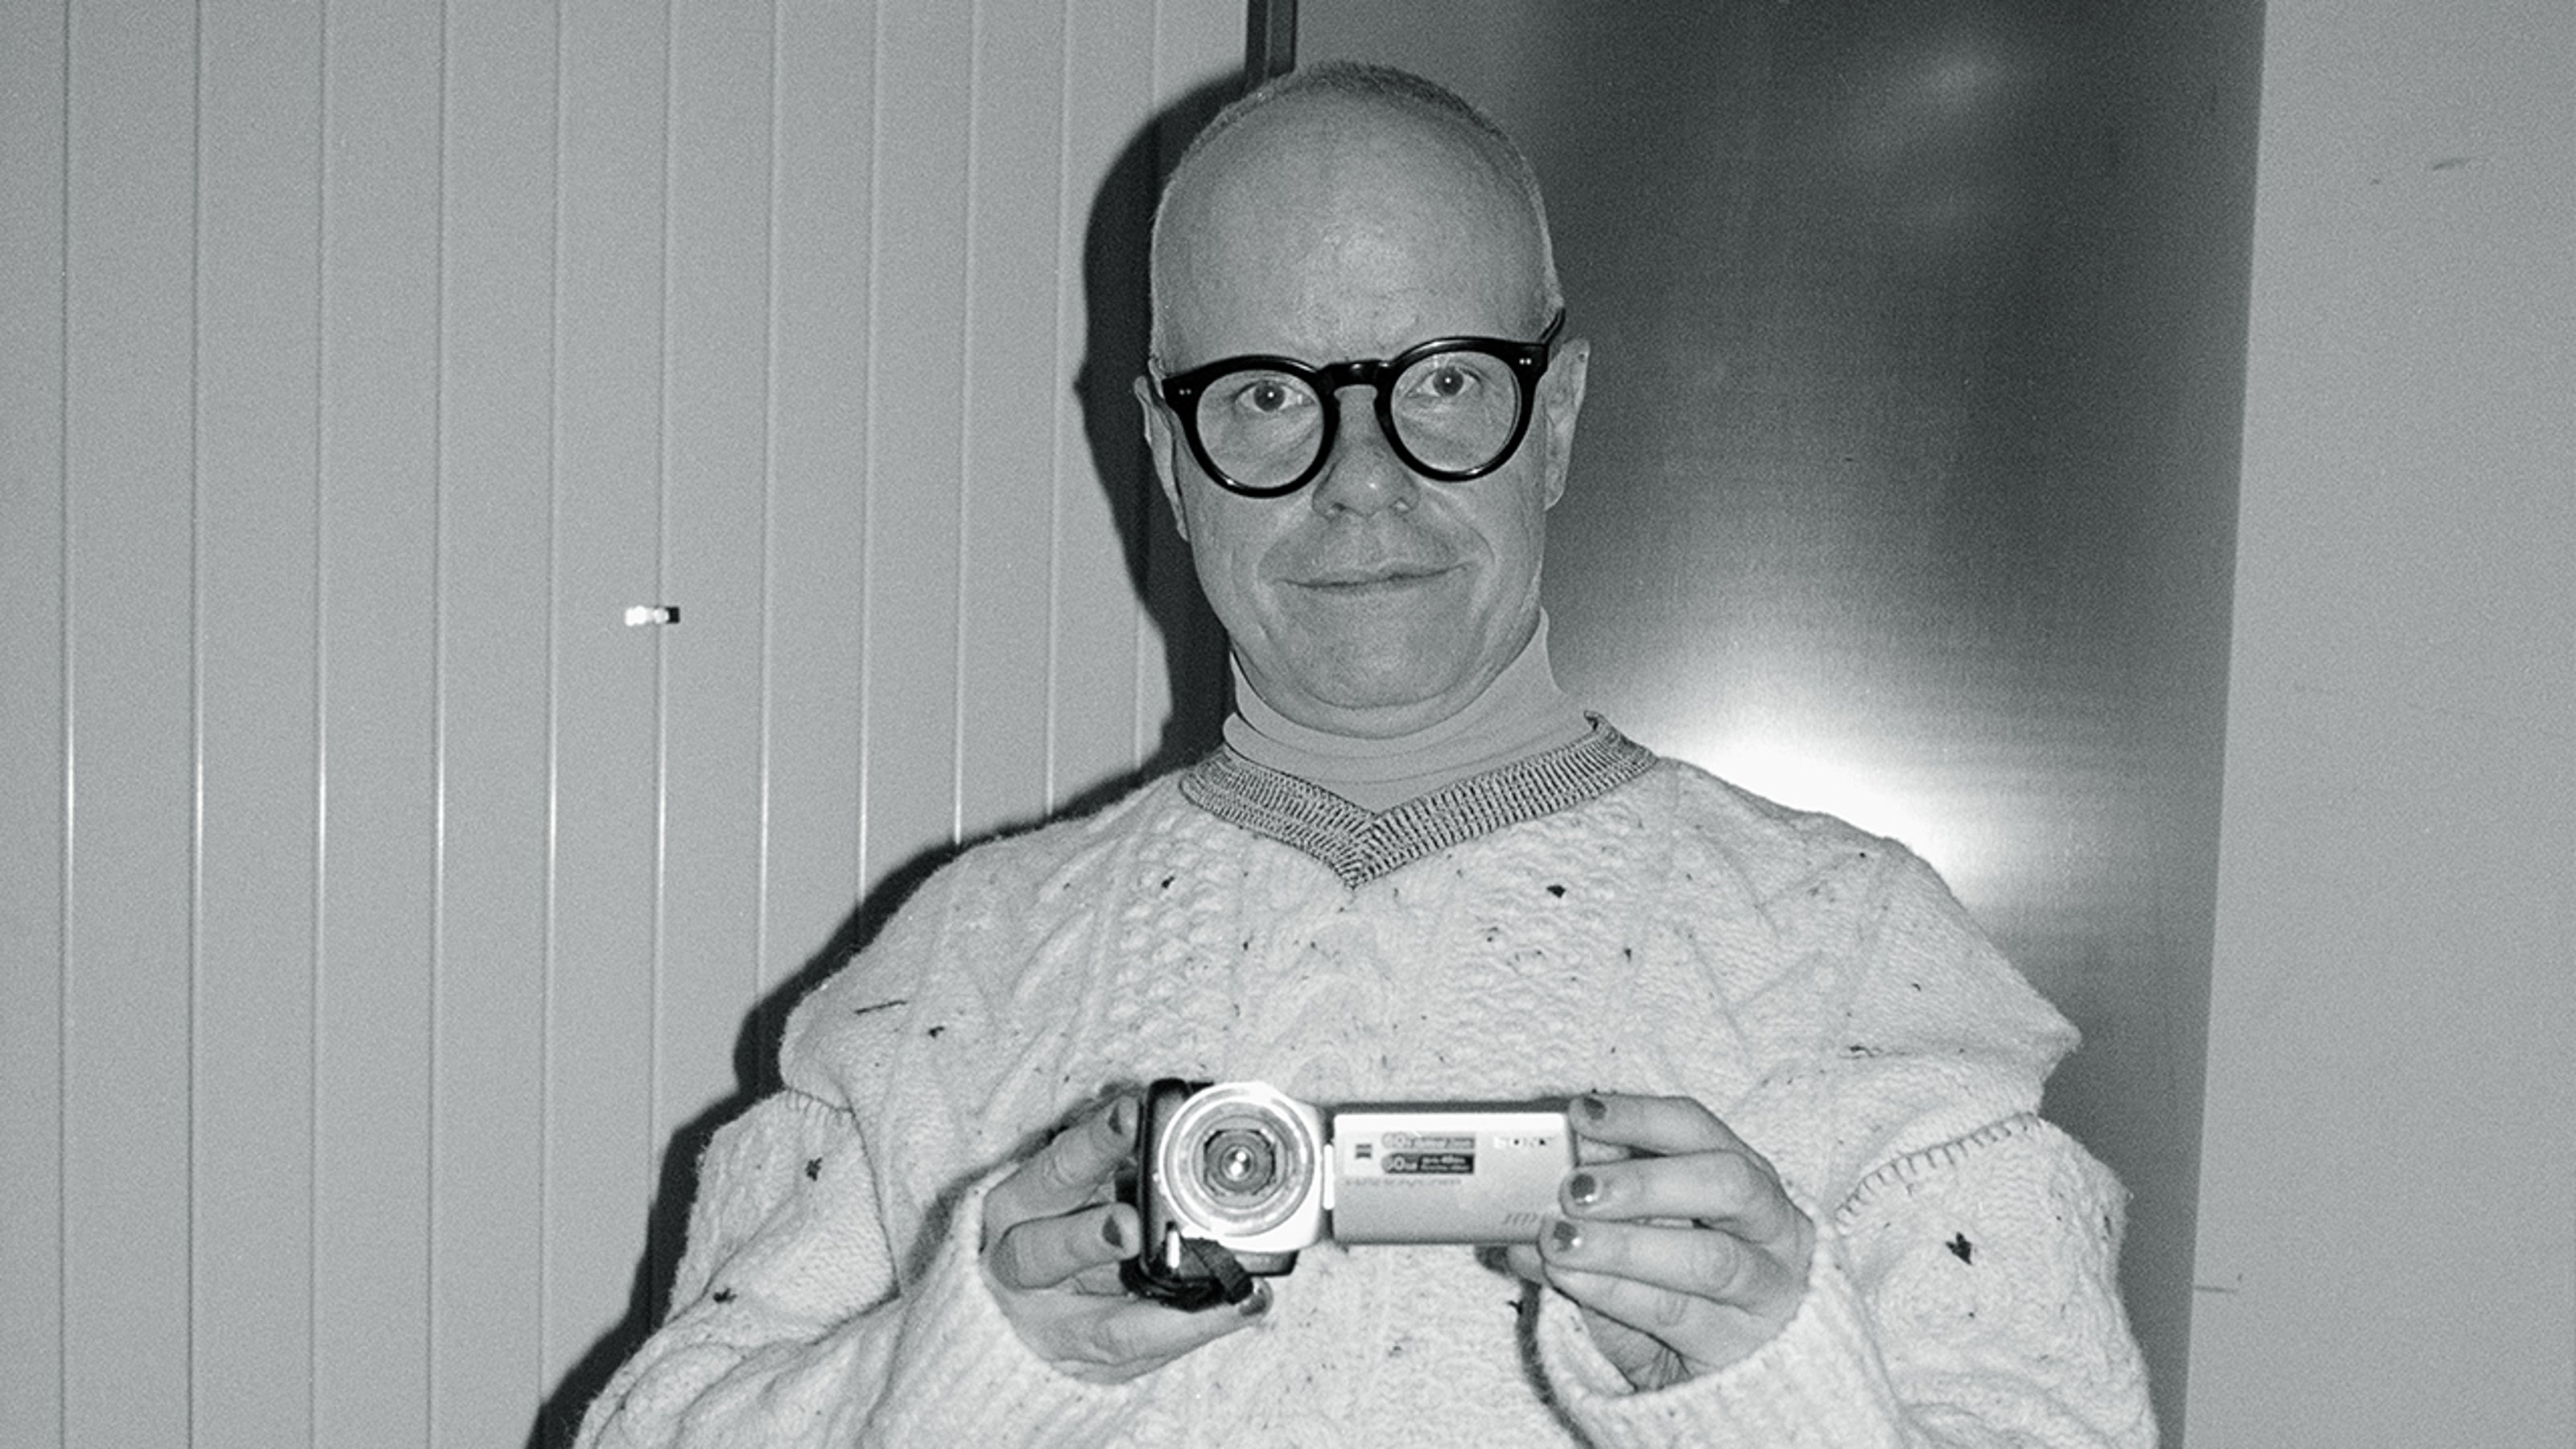 Hans Ulrich Obrist. Obrist is holding a video camera in the photo